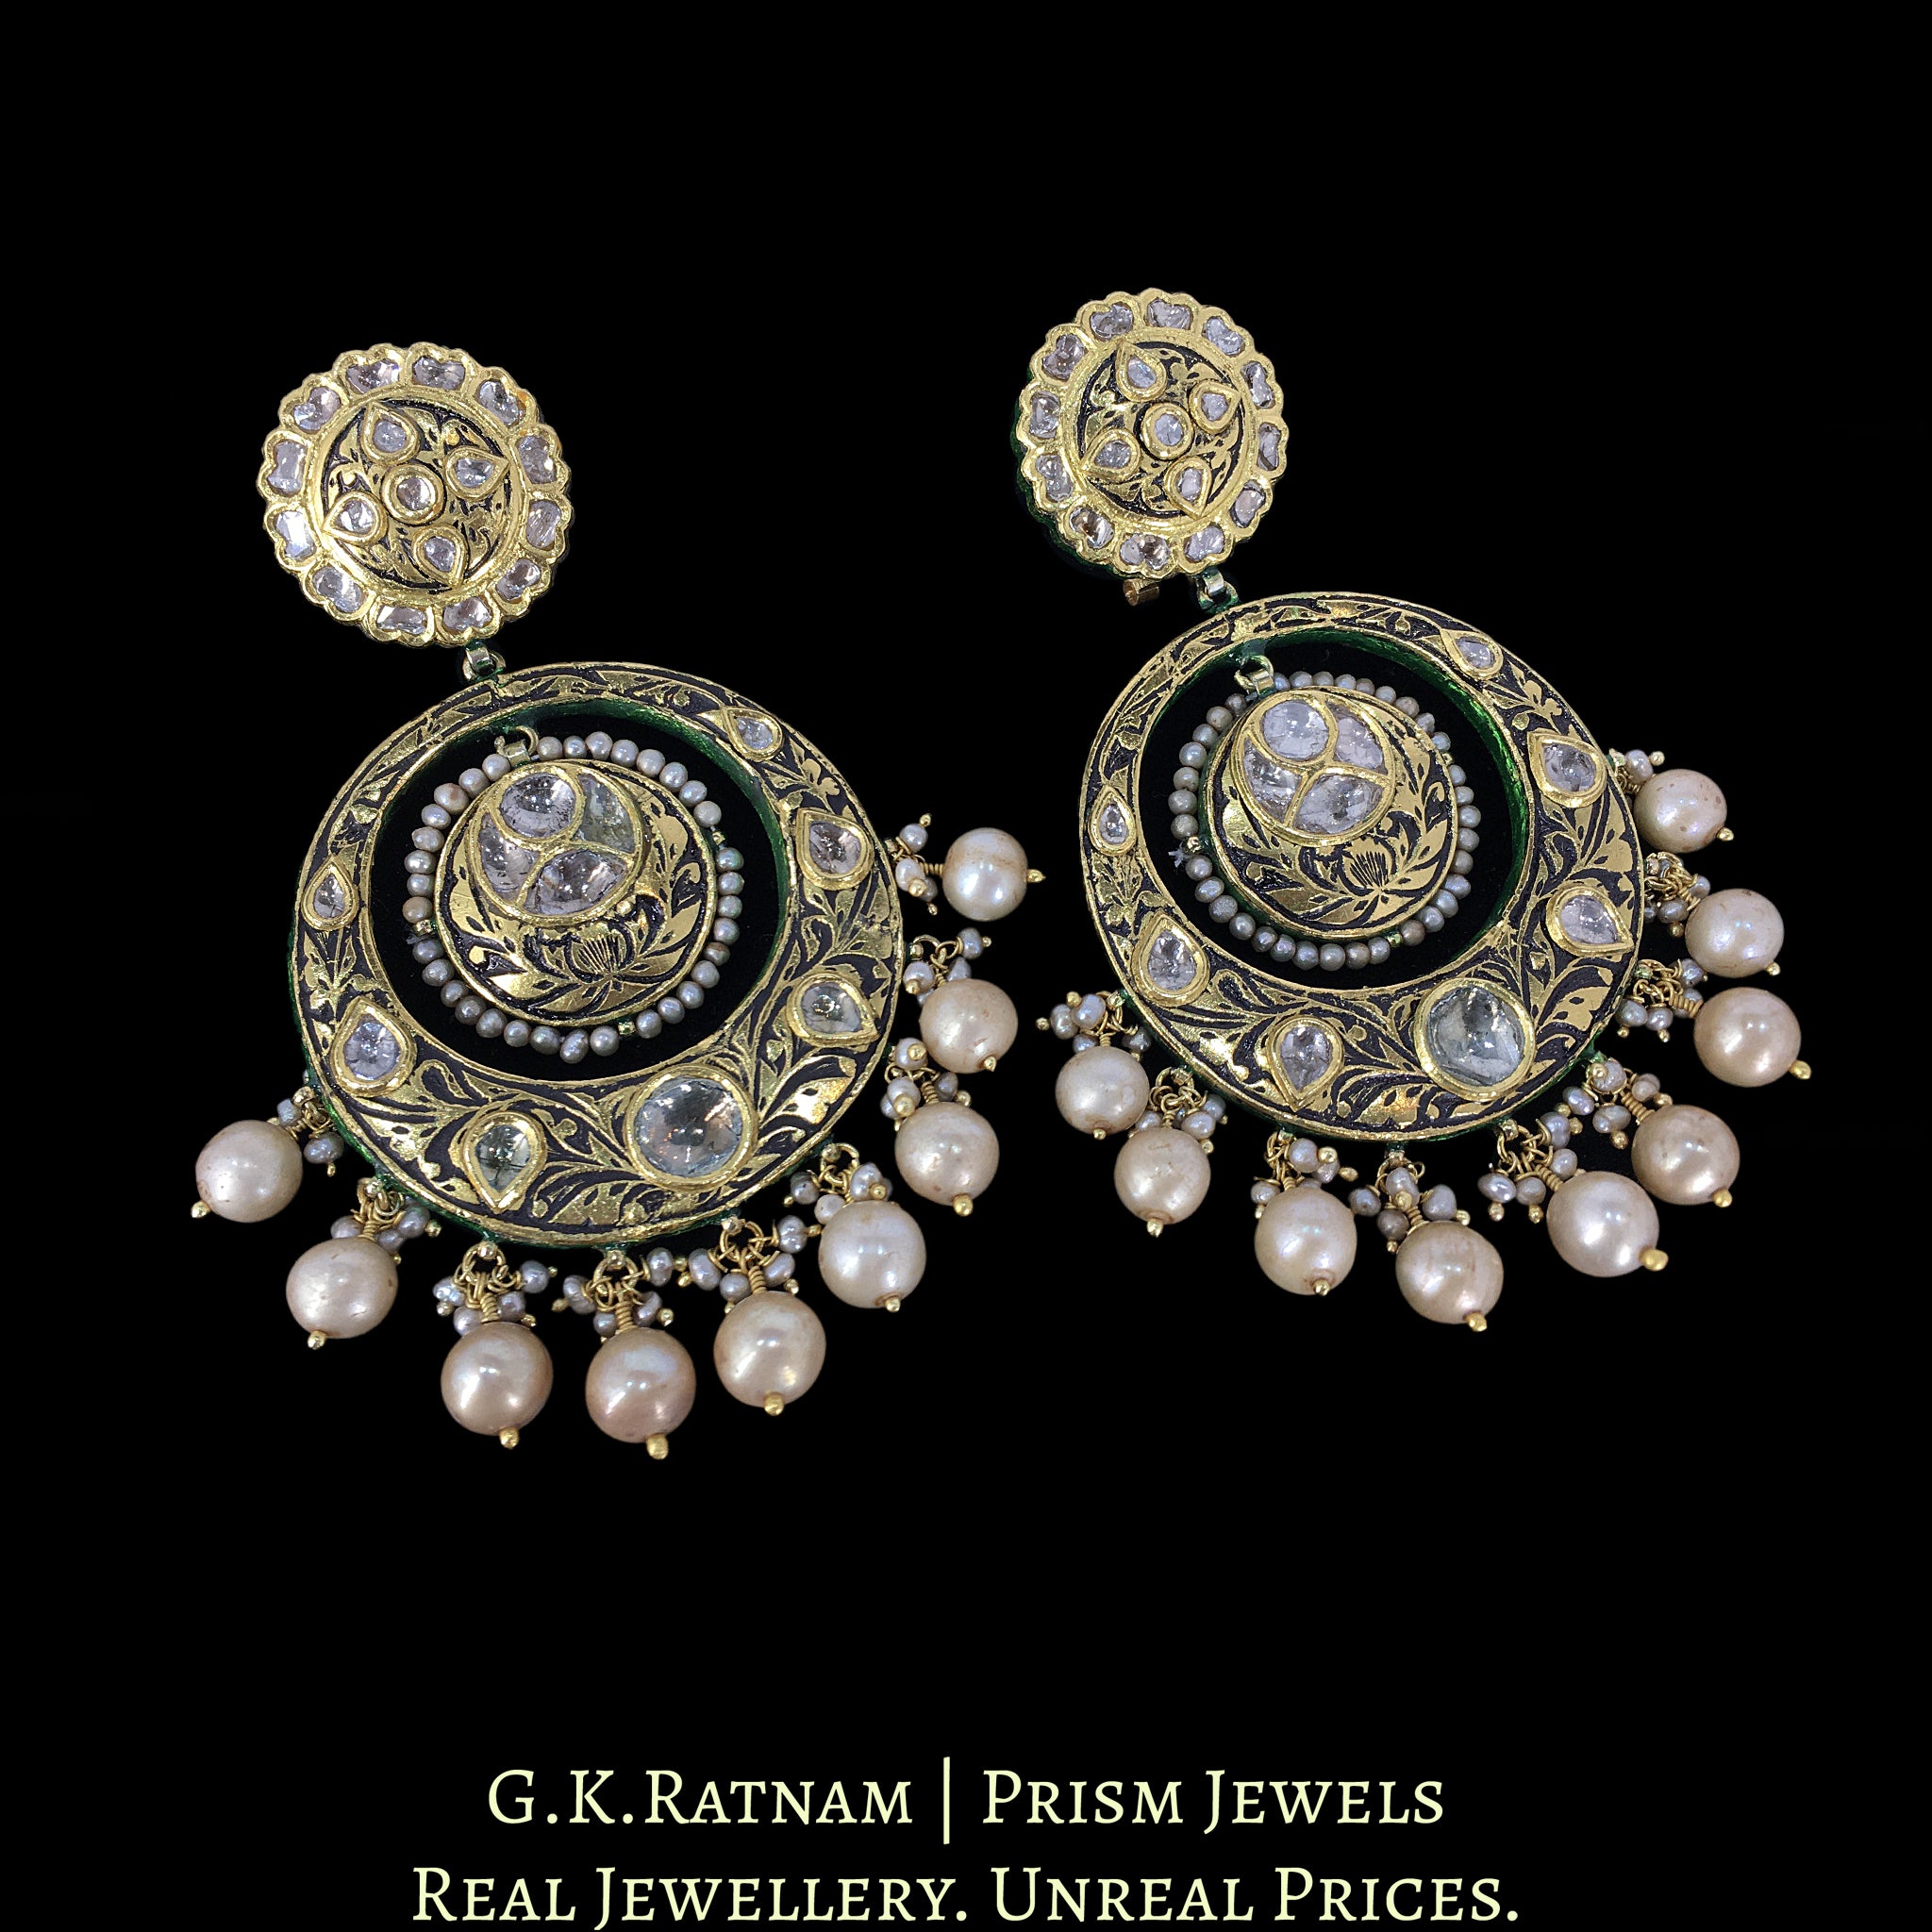 23k Gold and Diamond Polki antique-finish Chand Bali Earring Pair